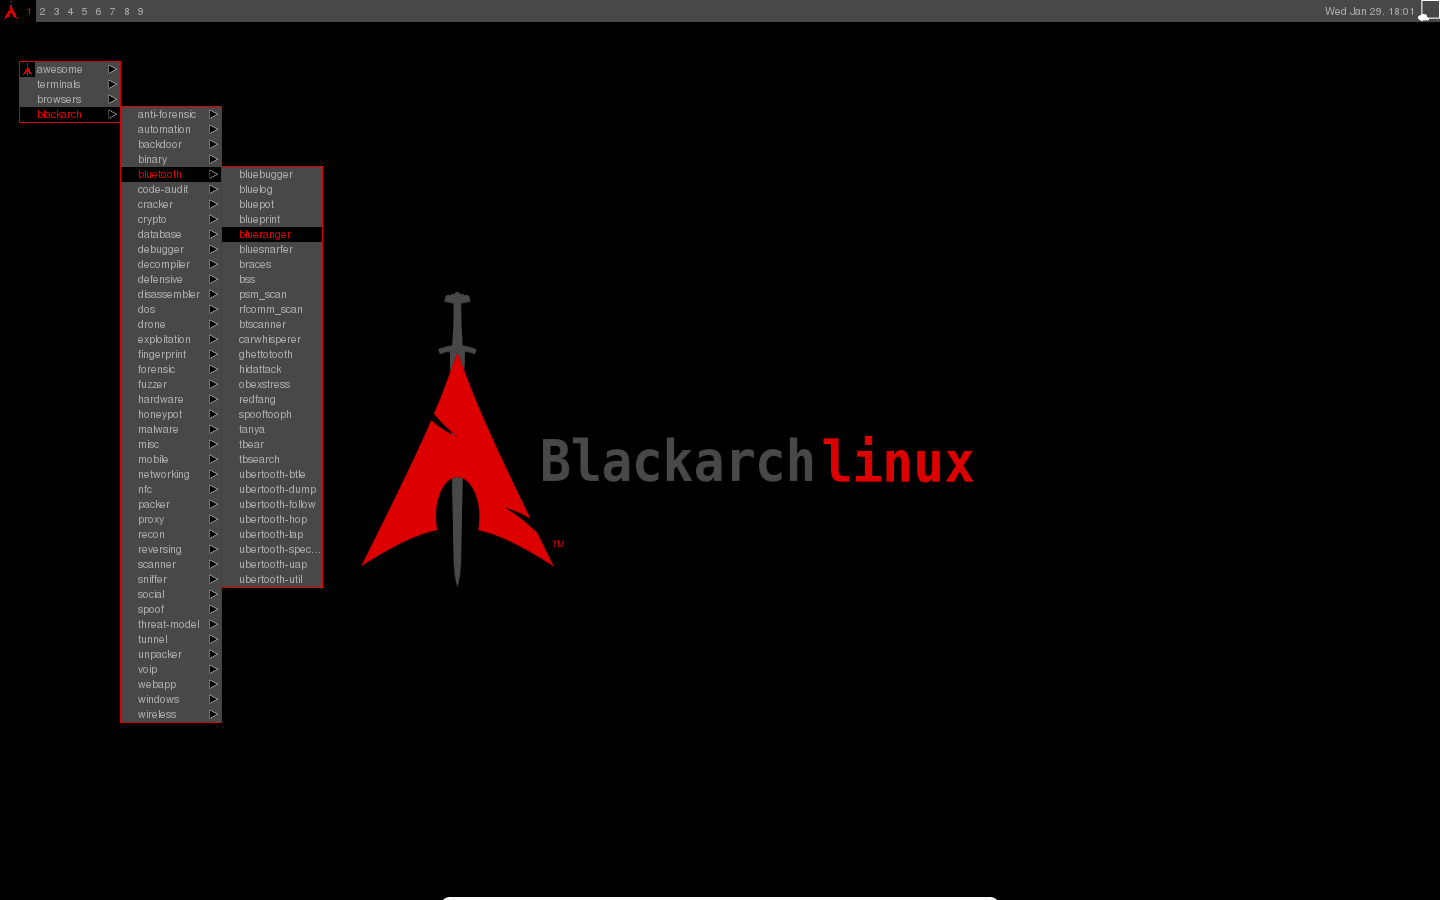 BlackArch Linux v2014.10.07 expansion to Arch Linux for pentesters and security researchers. Linux, Snowman wallpaper, Kali